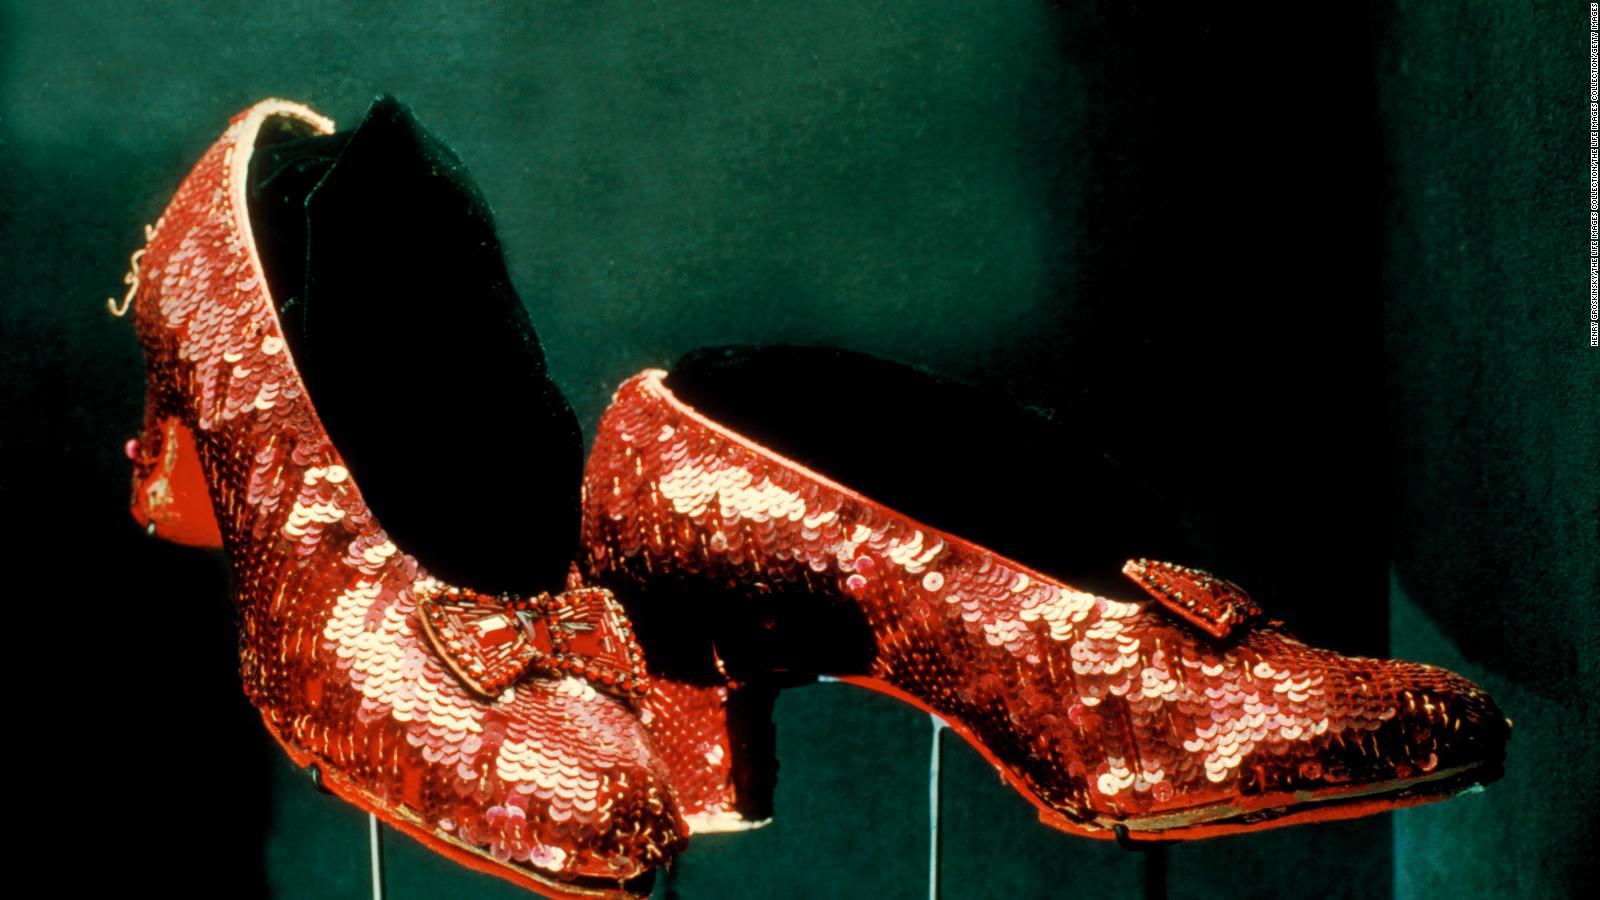 Stolen 'Wizard of Oz' ruby slippers 